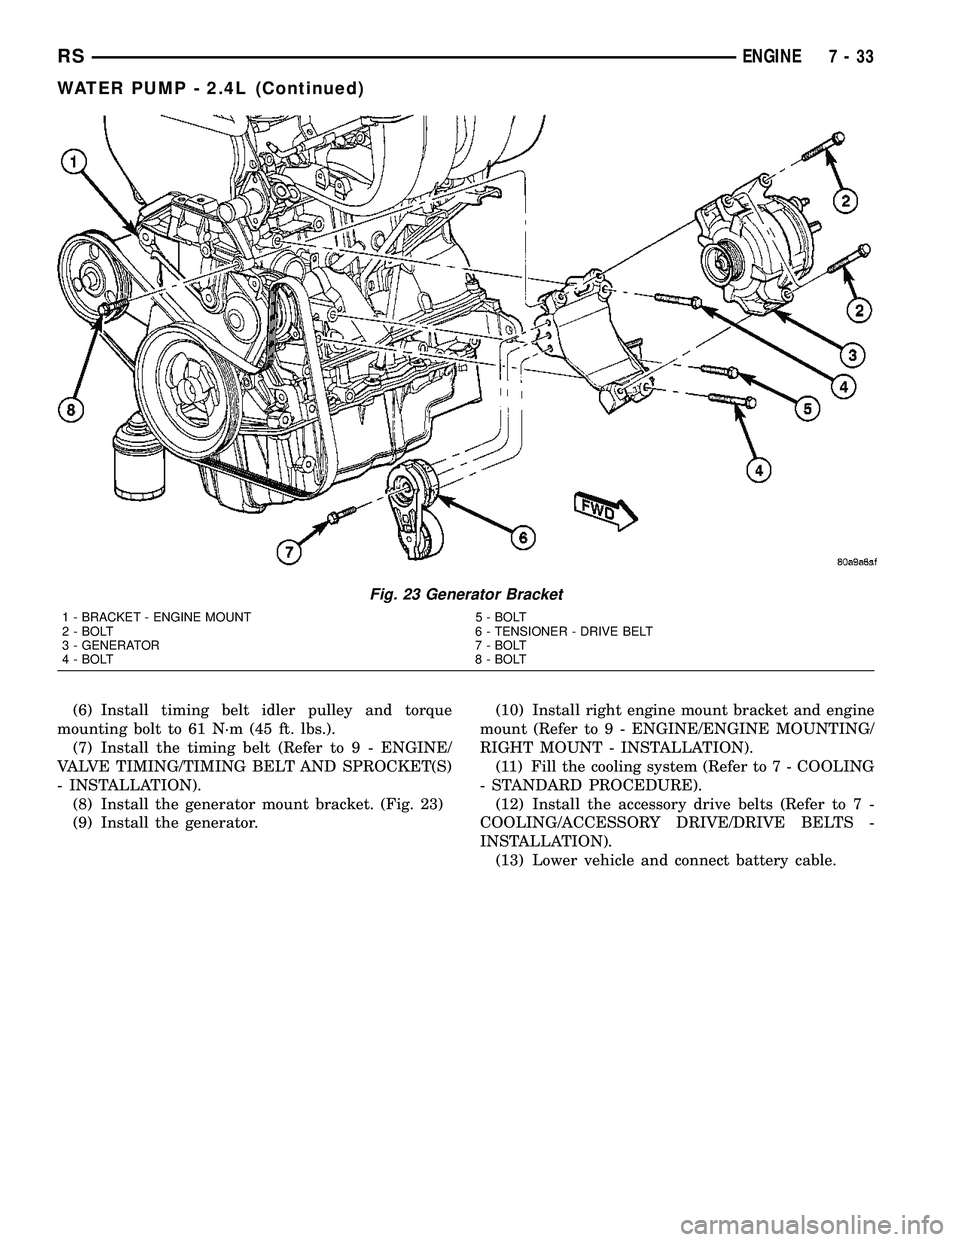 CHRYSLER CARAVAN 2005  Service Manual (6) Install timing belt idler pulley and torque
mounting bolt to 61 N´m (45 ft. lbs.).
(7) Install the timing belt (Refer to 9 - ENGINE/
VALVE TIMING/TIMING BELT AND SPROCKET(S)
- INSTALLATION).
(8) 